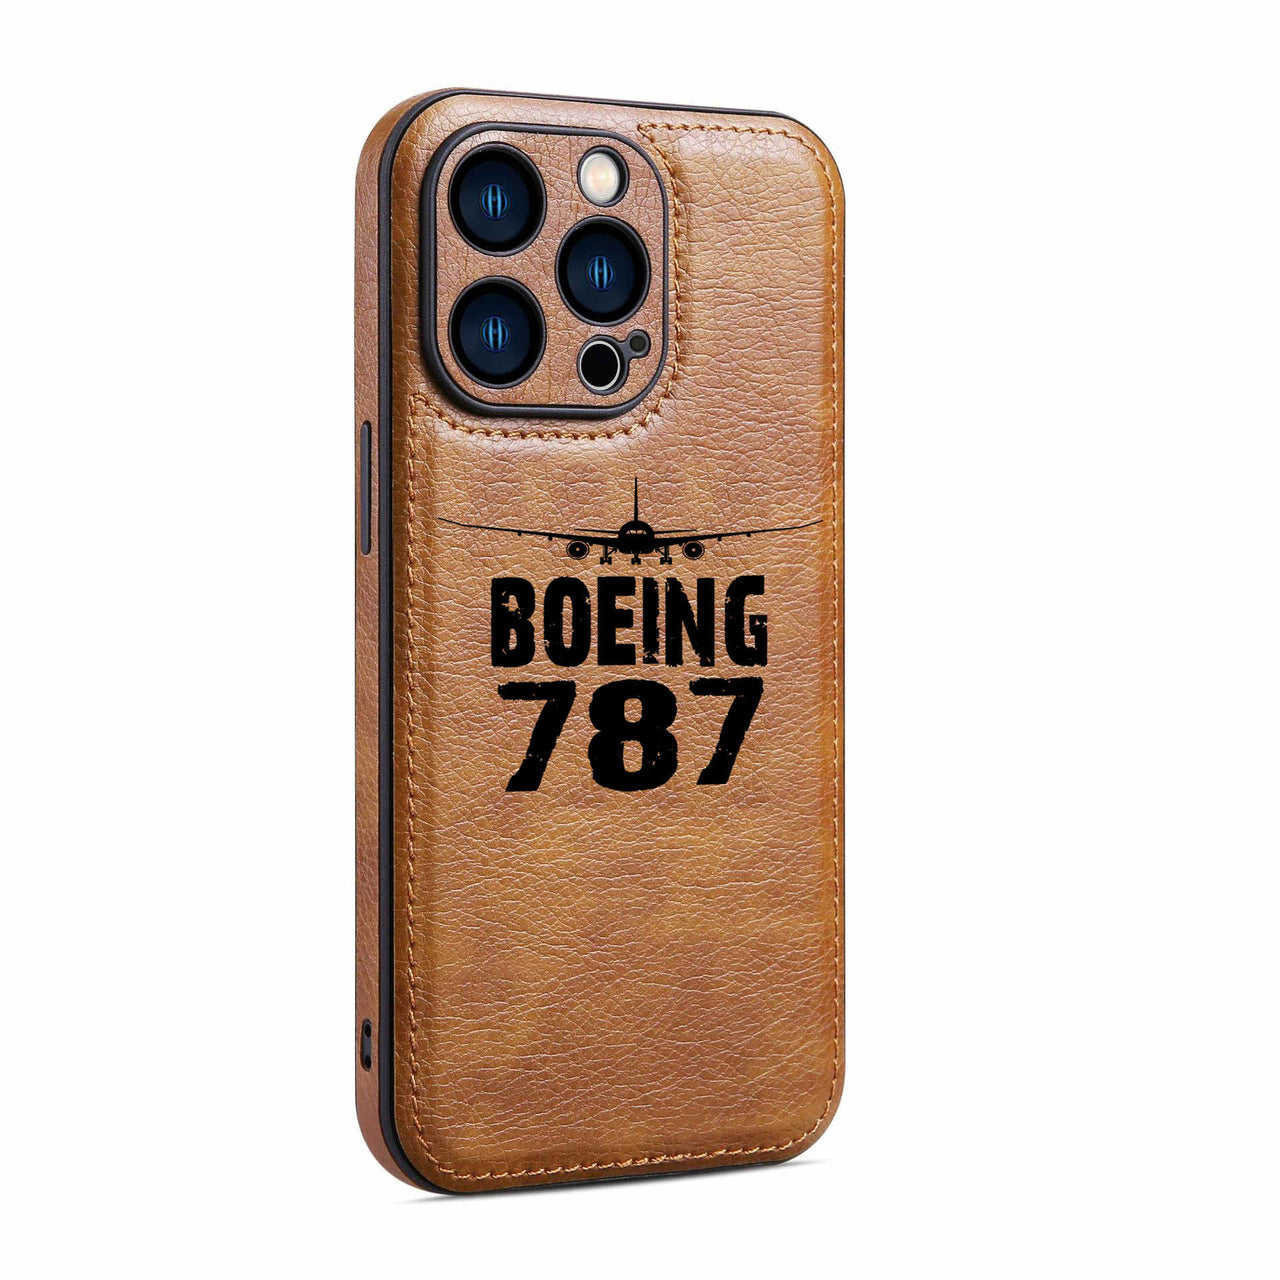 Boeing 787 & Plane Designed Leather iPhone Cases